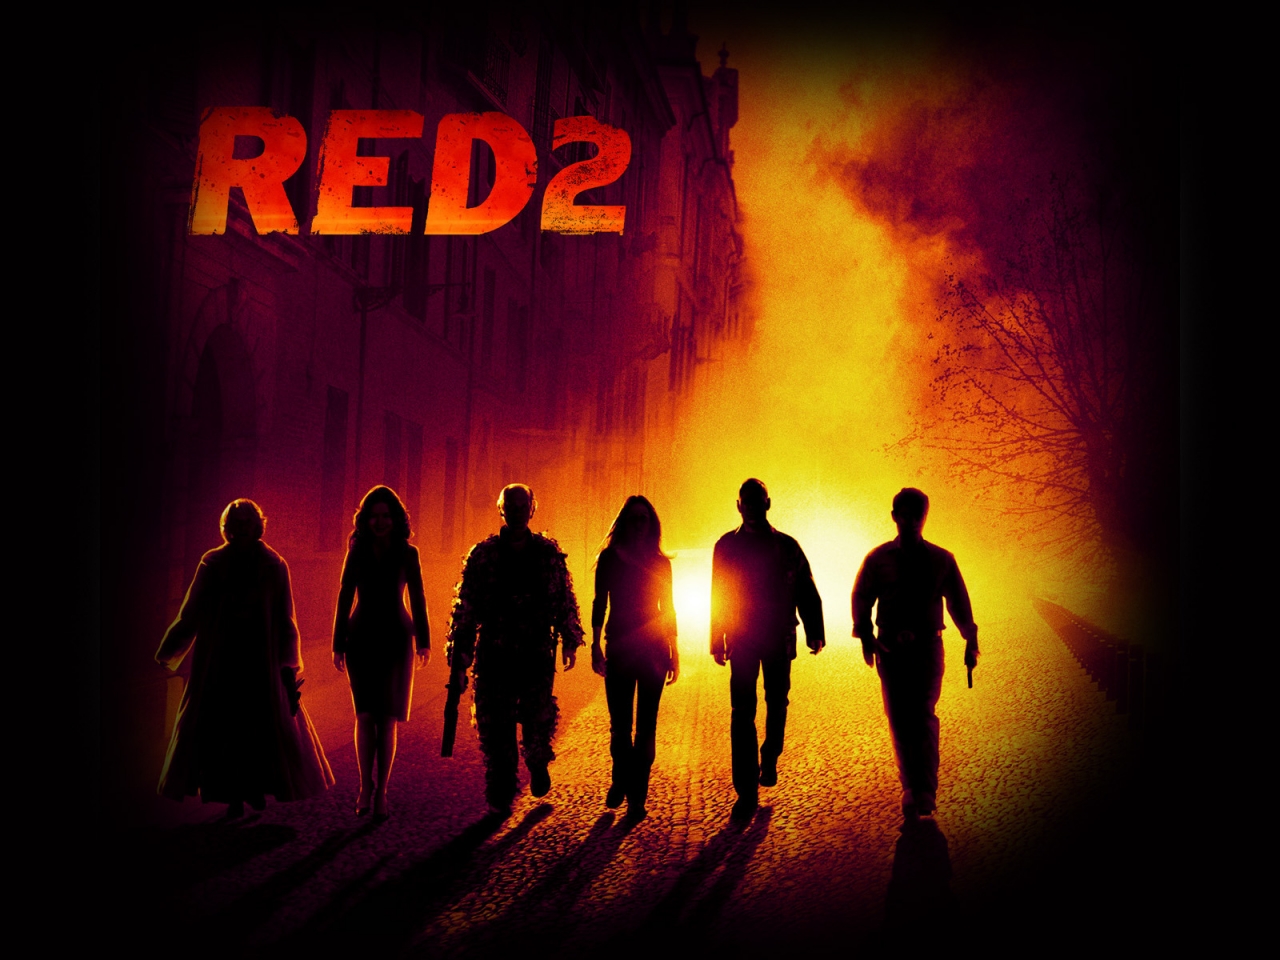 2013 RED 2 for 1280 x 960 resolution